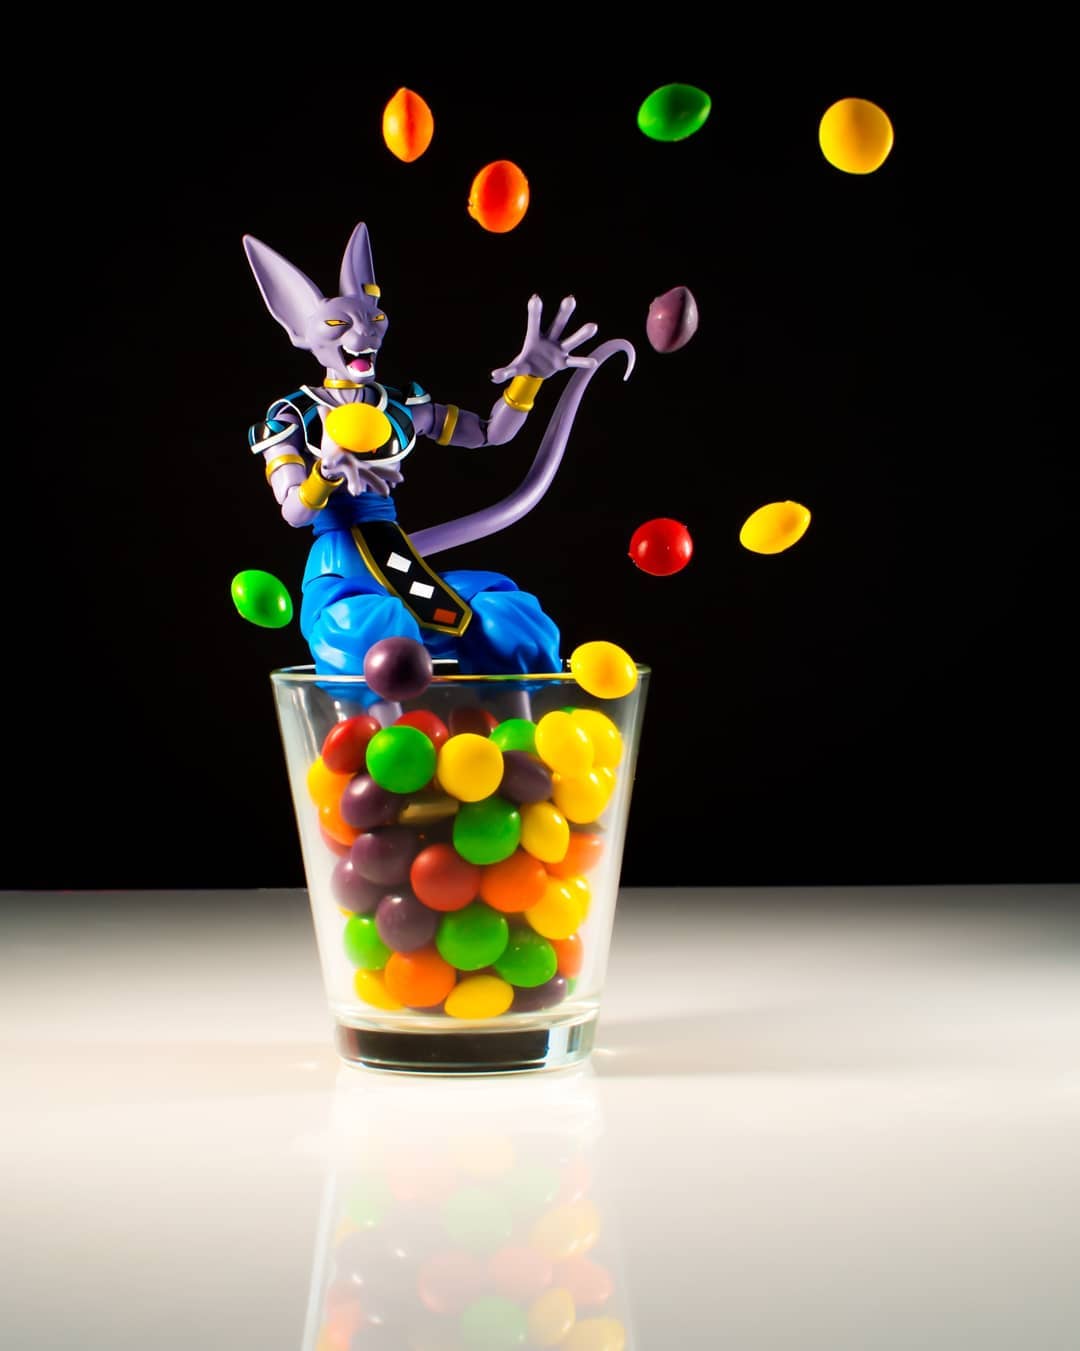 Action Shots Of Pop Culture Characters With Drinks By Andrea (9)